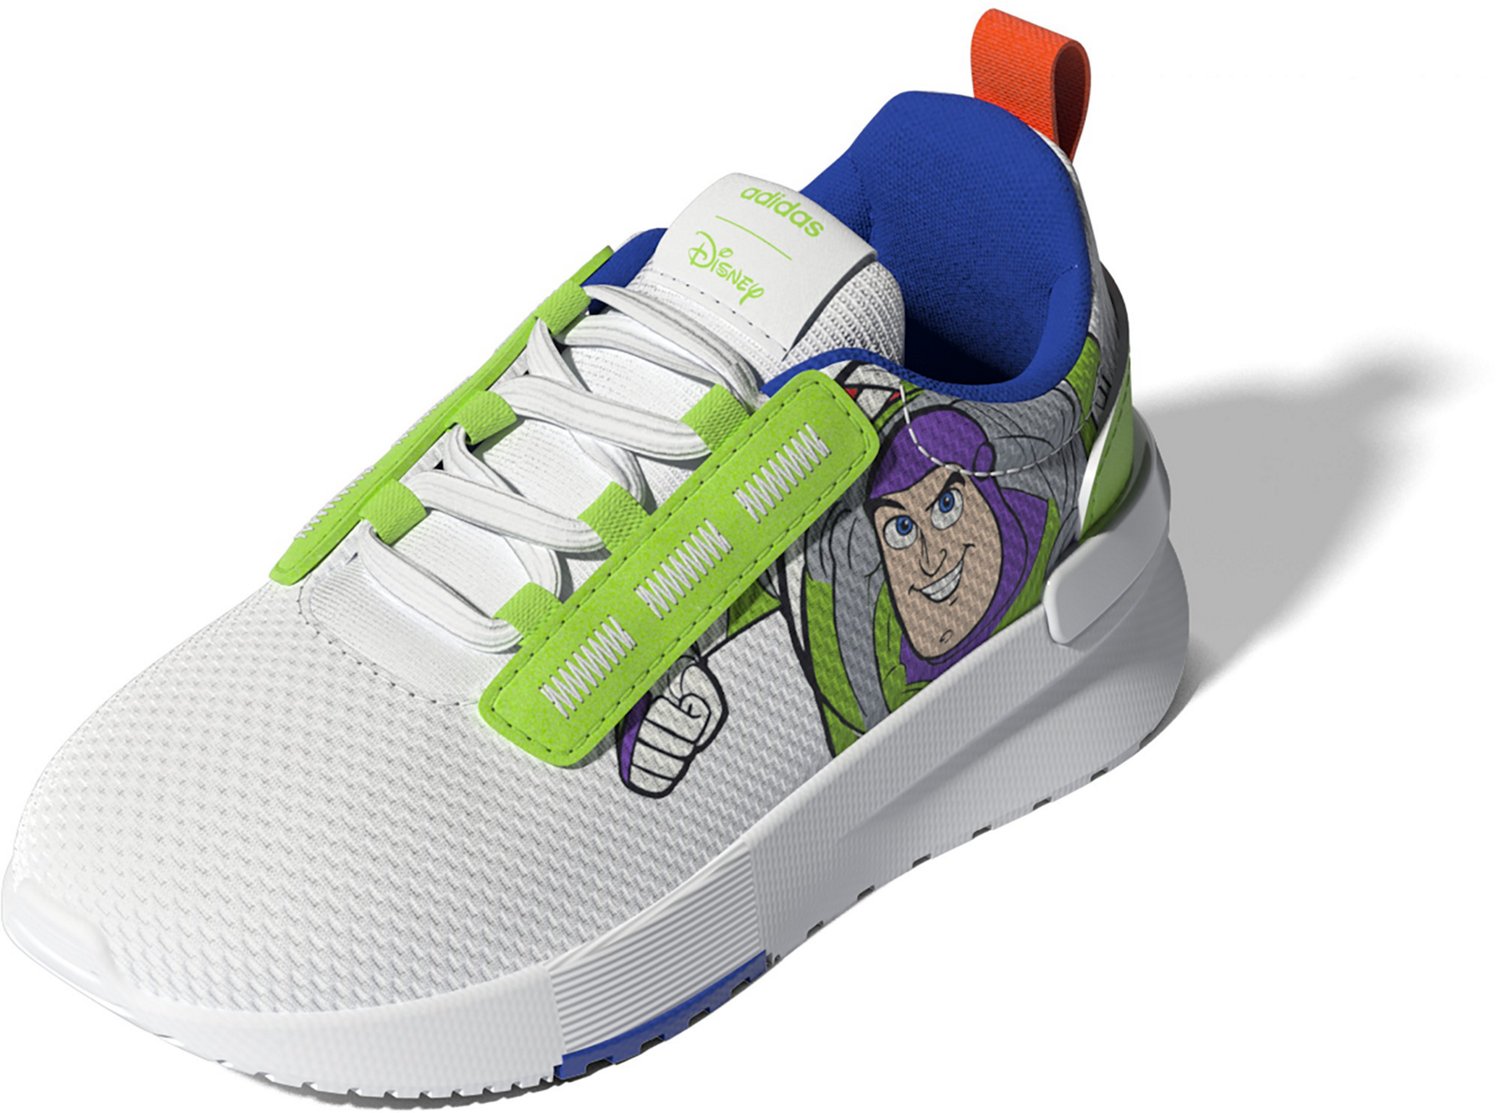 adidas Toddlers' Racer TR21 Buzz Lightyear Shoes | Academy